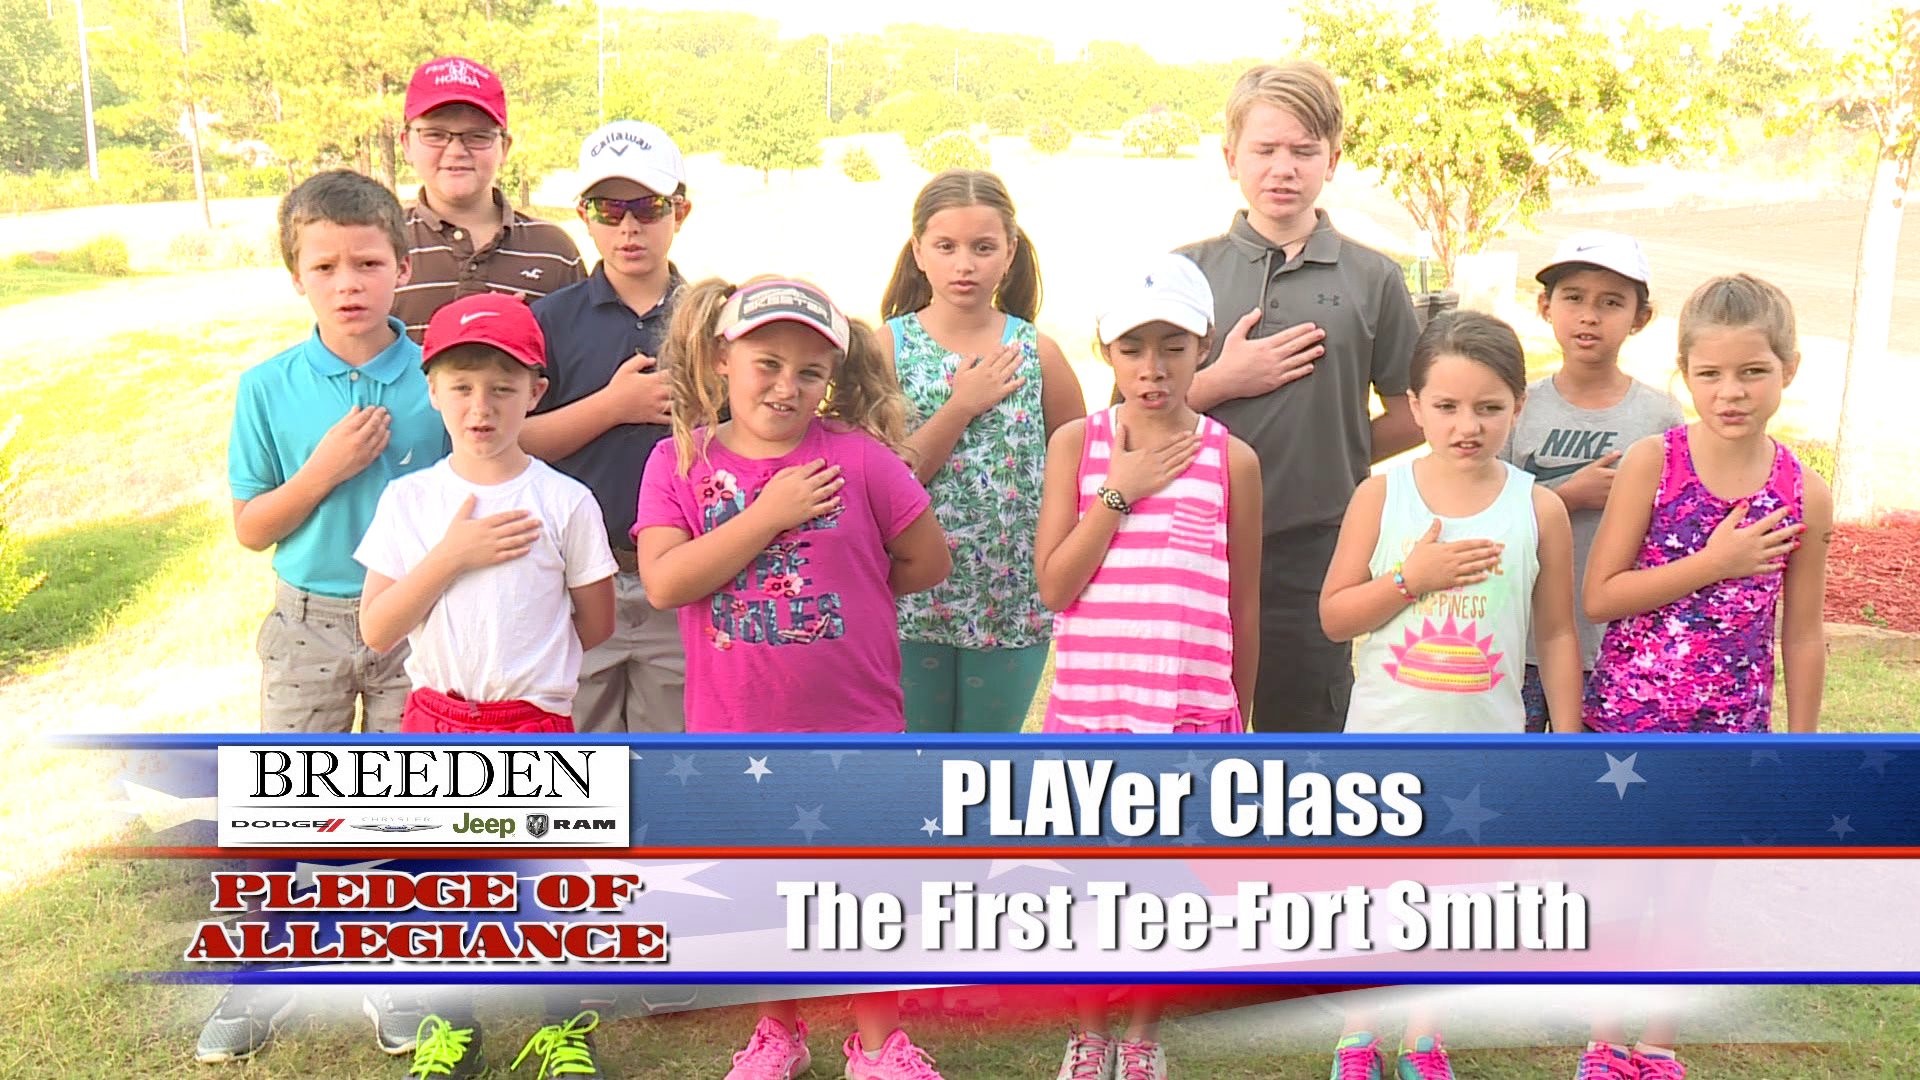 PLAYer Class  The First Tee  Fort Smith